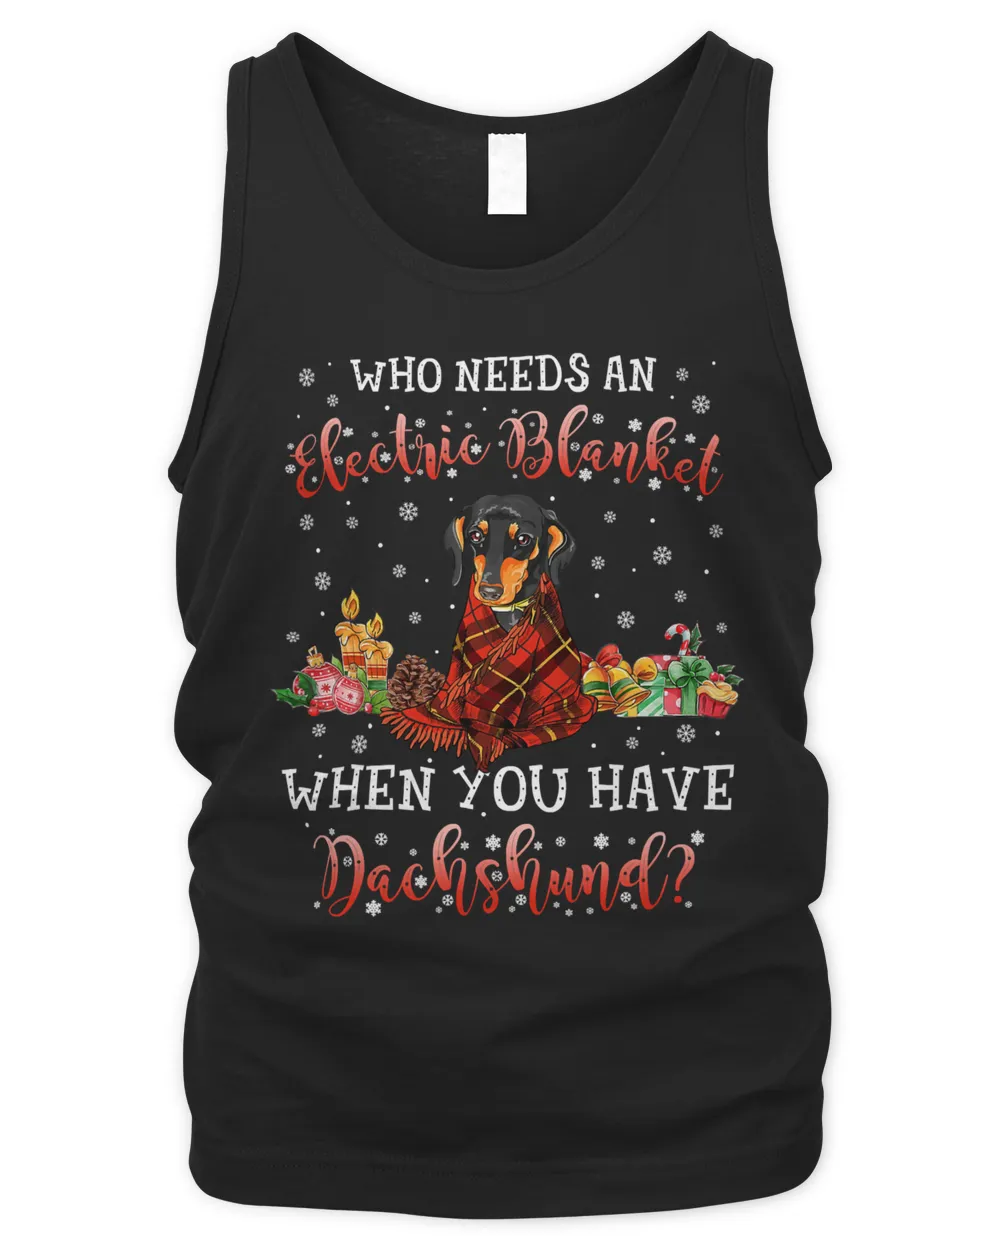 Dachshund Doxie Who Needs Blanket When You Have Dachshund Doxie Christmas 83 Wiener Dog